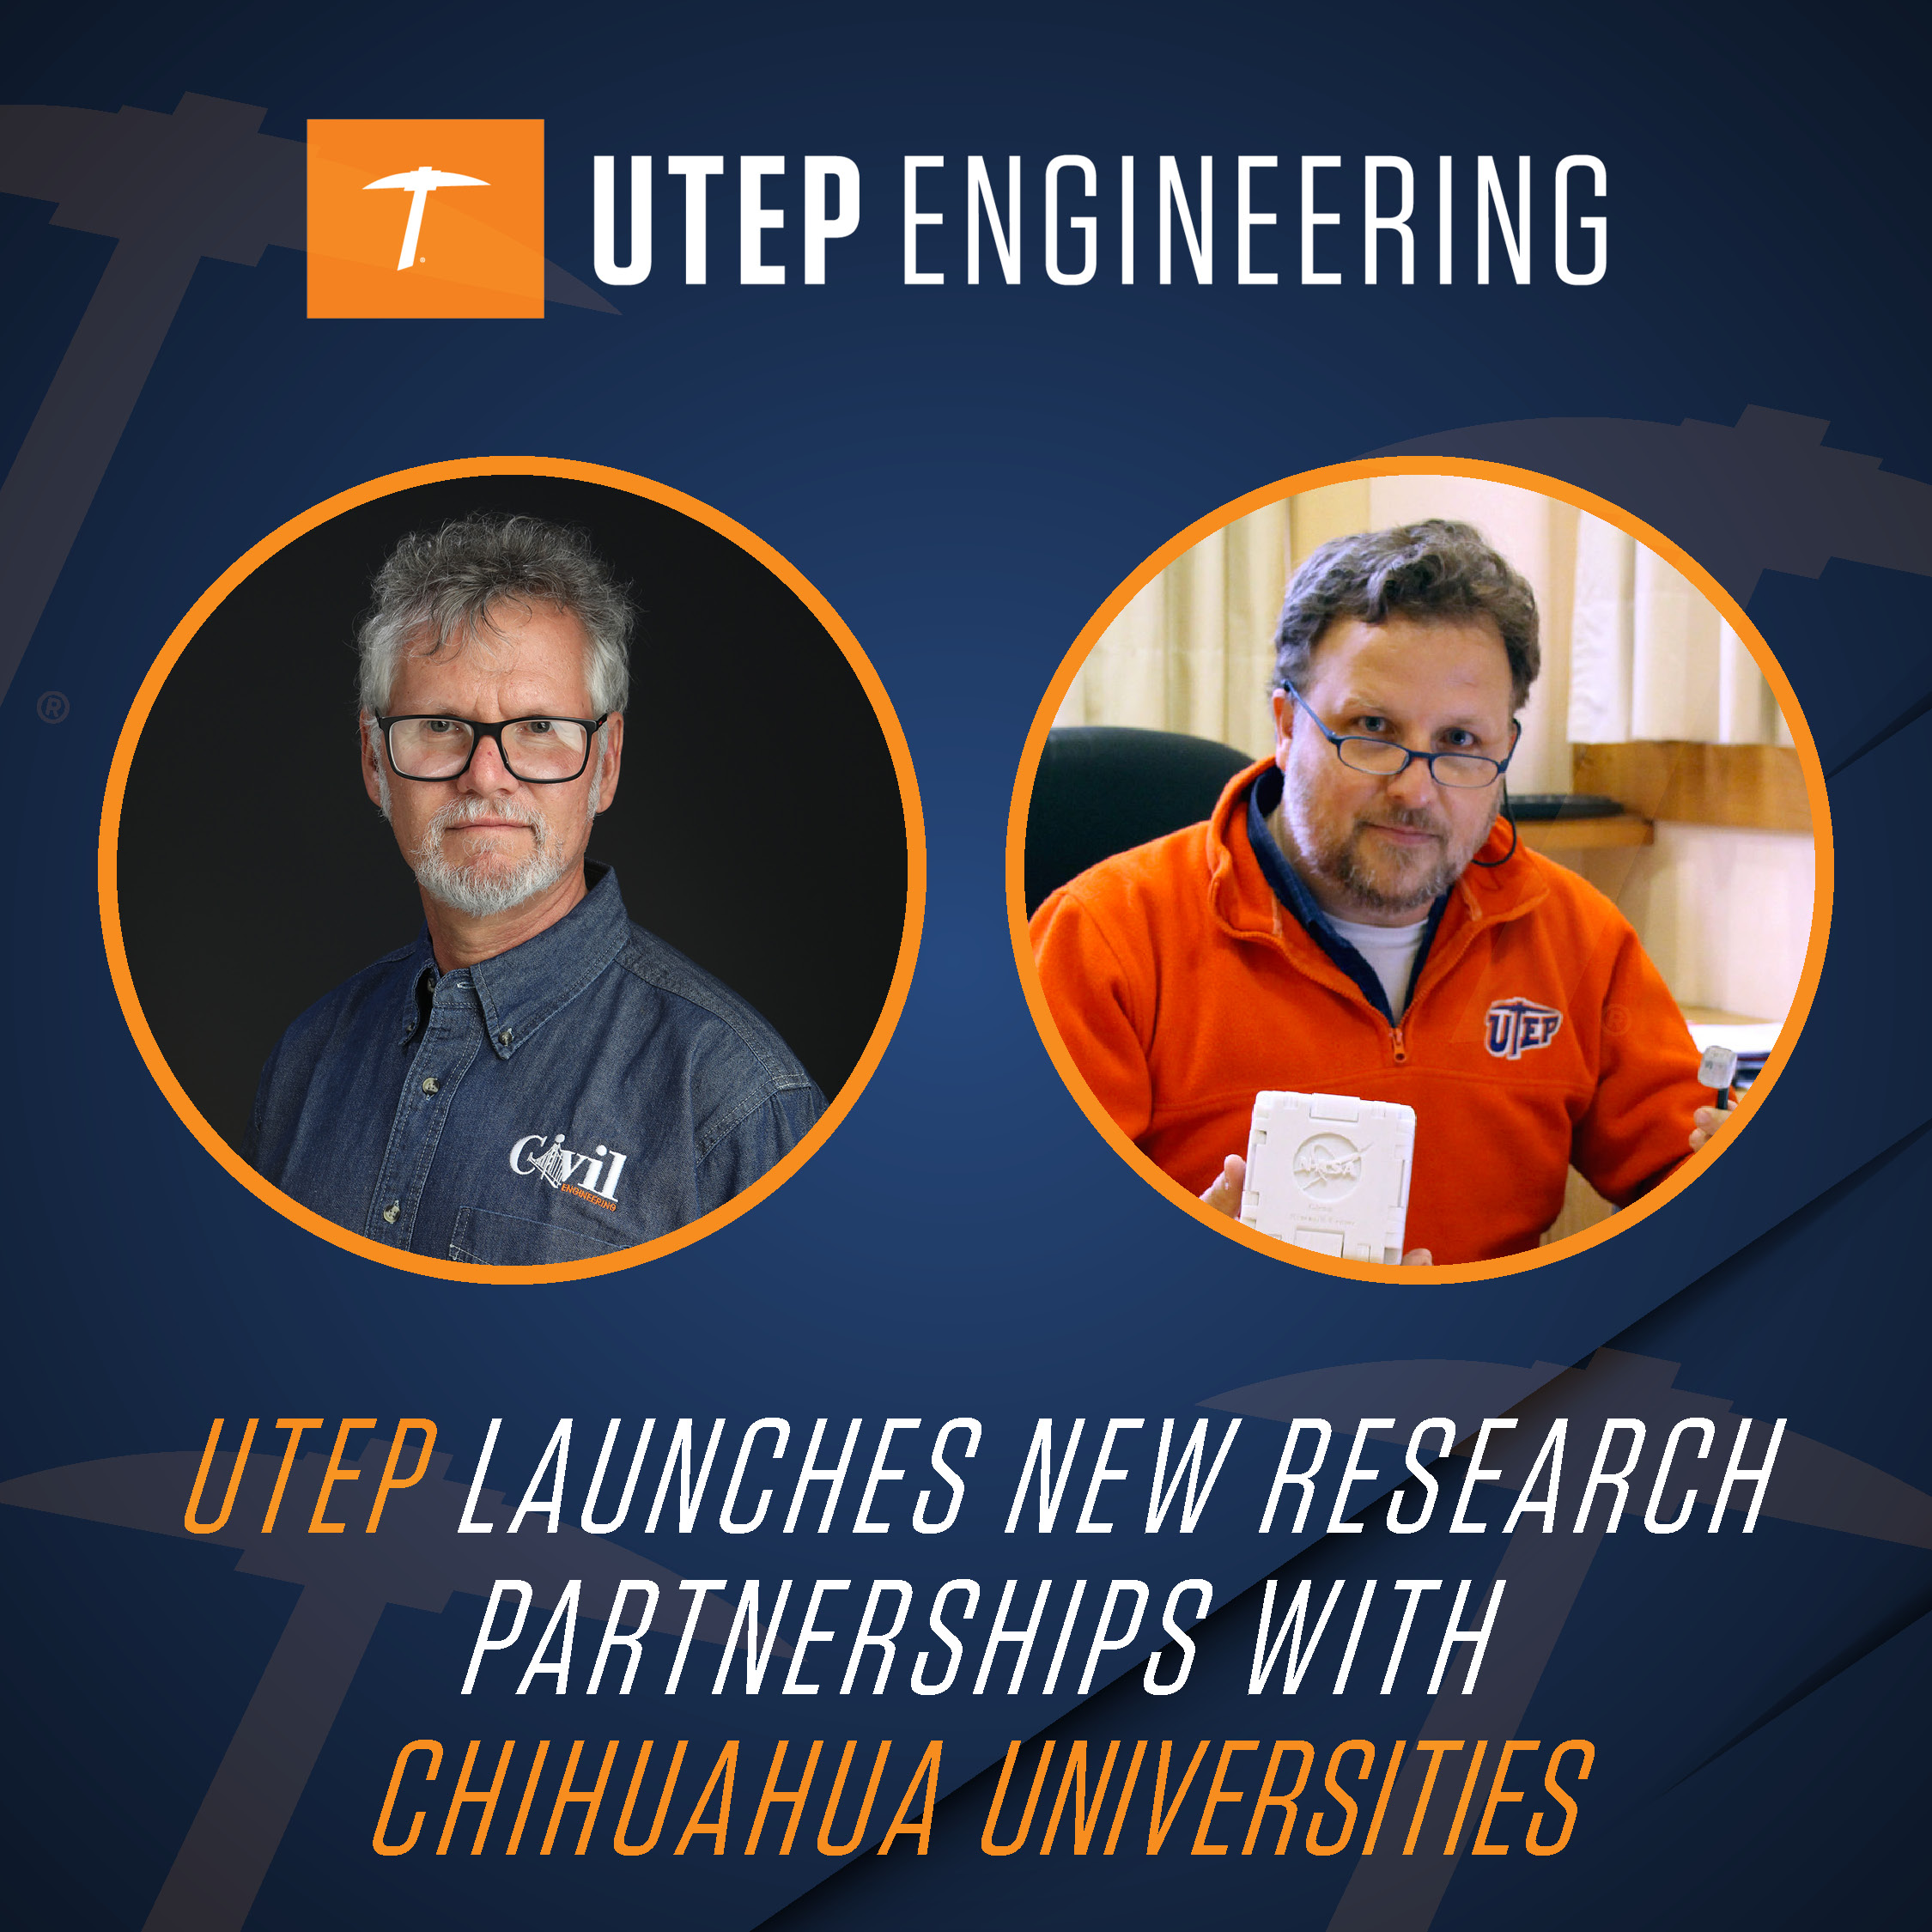 UTEP Launches New Research Partnerships with Chihuahua Universities